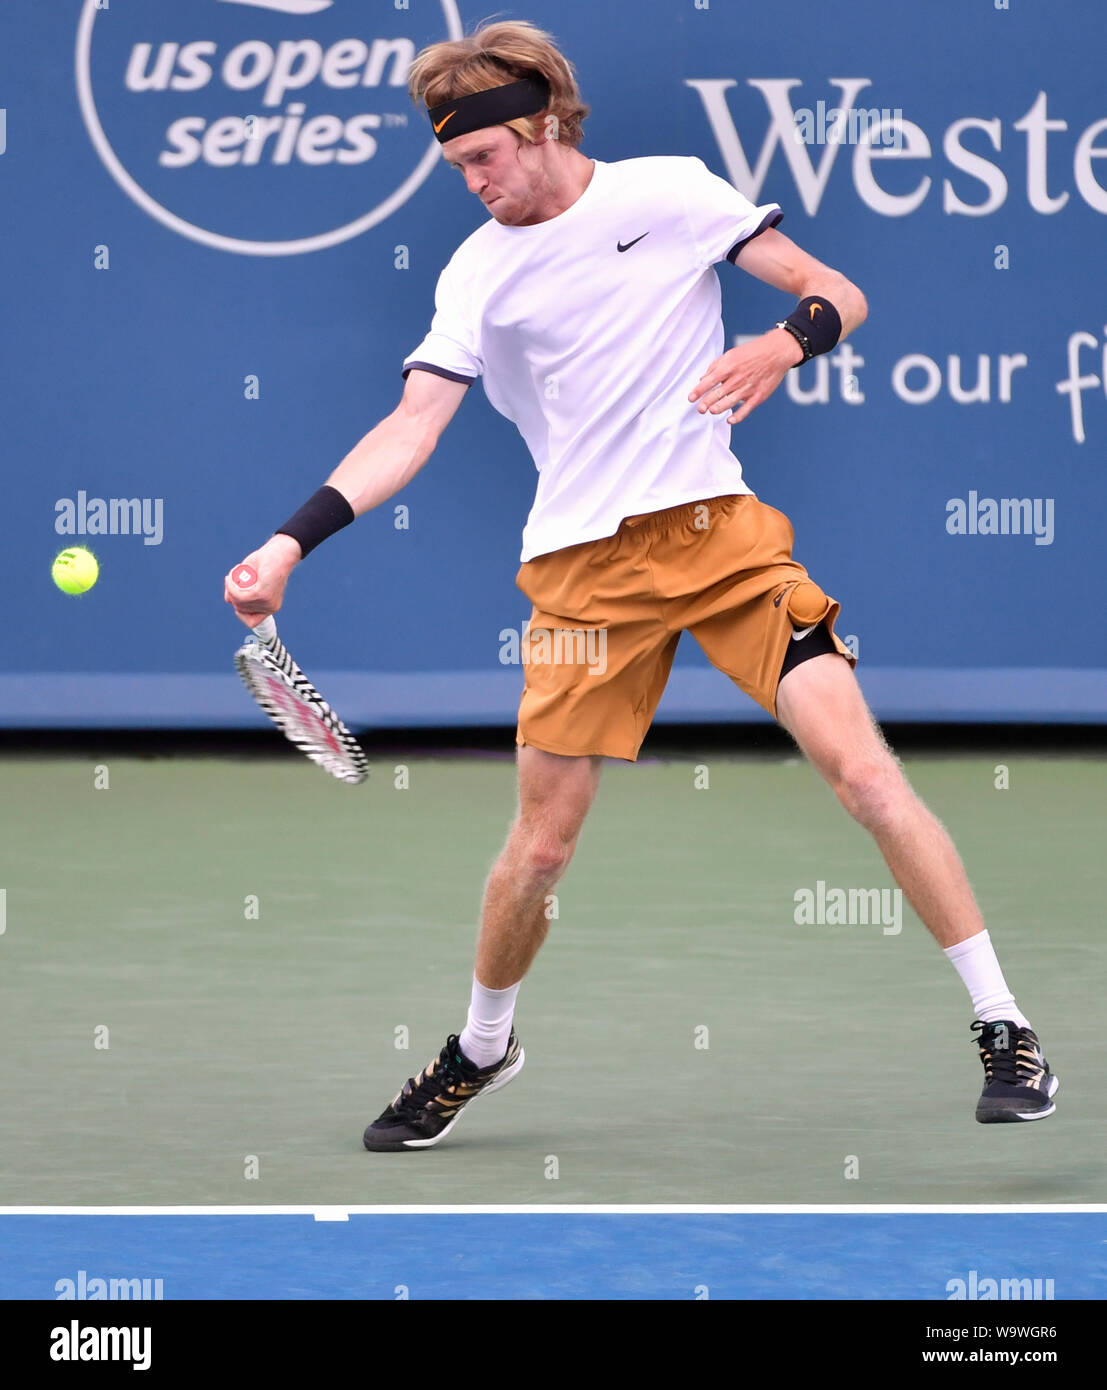 Mason, Ohio, USA. 15th Aug, 2019. August 15, 2019: Andrey Rublev (RUS)  defeated Roger Federer (SUI) 6-3, 6-4, at the Western & Southern Open being  played at Lindner Family Tennis Center in